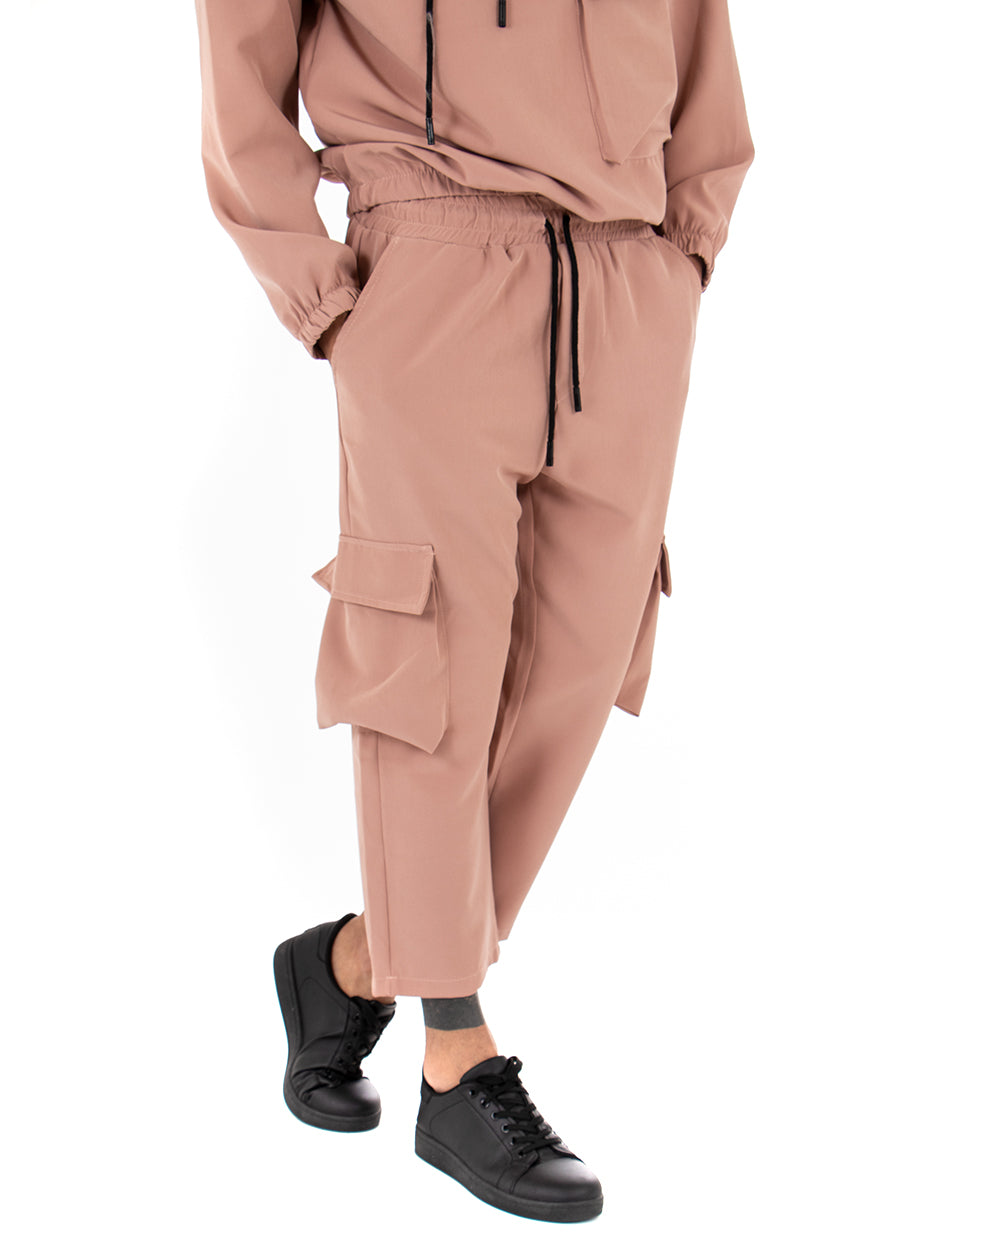 Complete Men's Tracksuit Pink Viscose Relaxed Fit Hooded Sweatshirt Cargo Pants GIOSAL-OU1843A